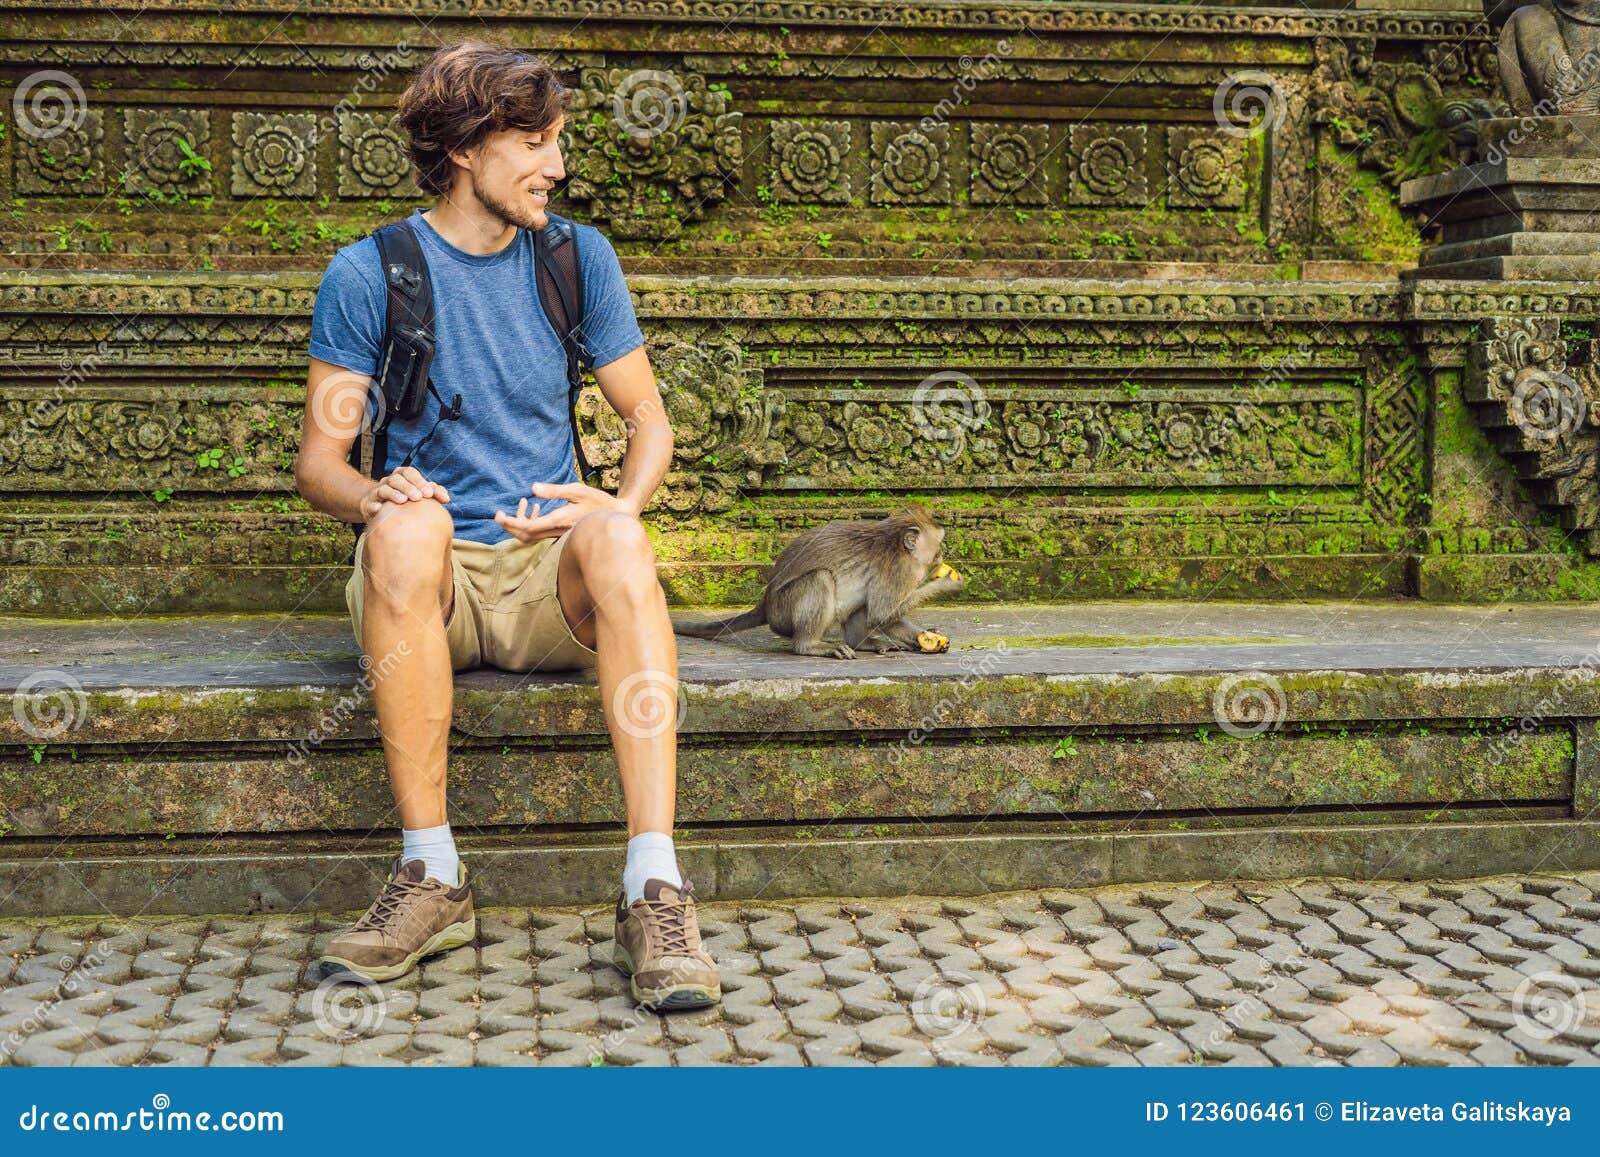 Selfie with Monkeys. Young Man Uses a Selfie To Take a Photo Video Blog with Cute Funny Monkey Stock Image - Image of island, nature: